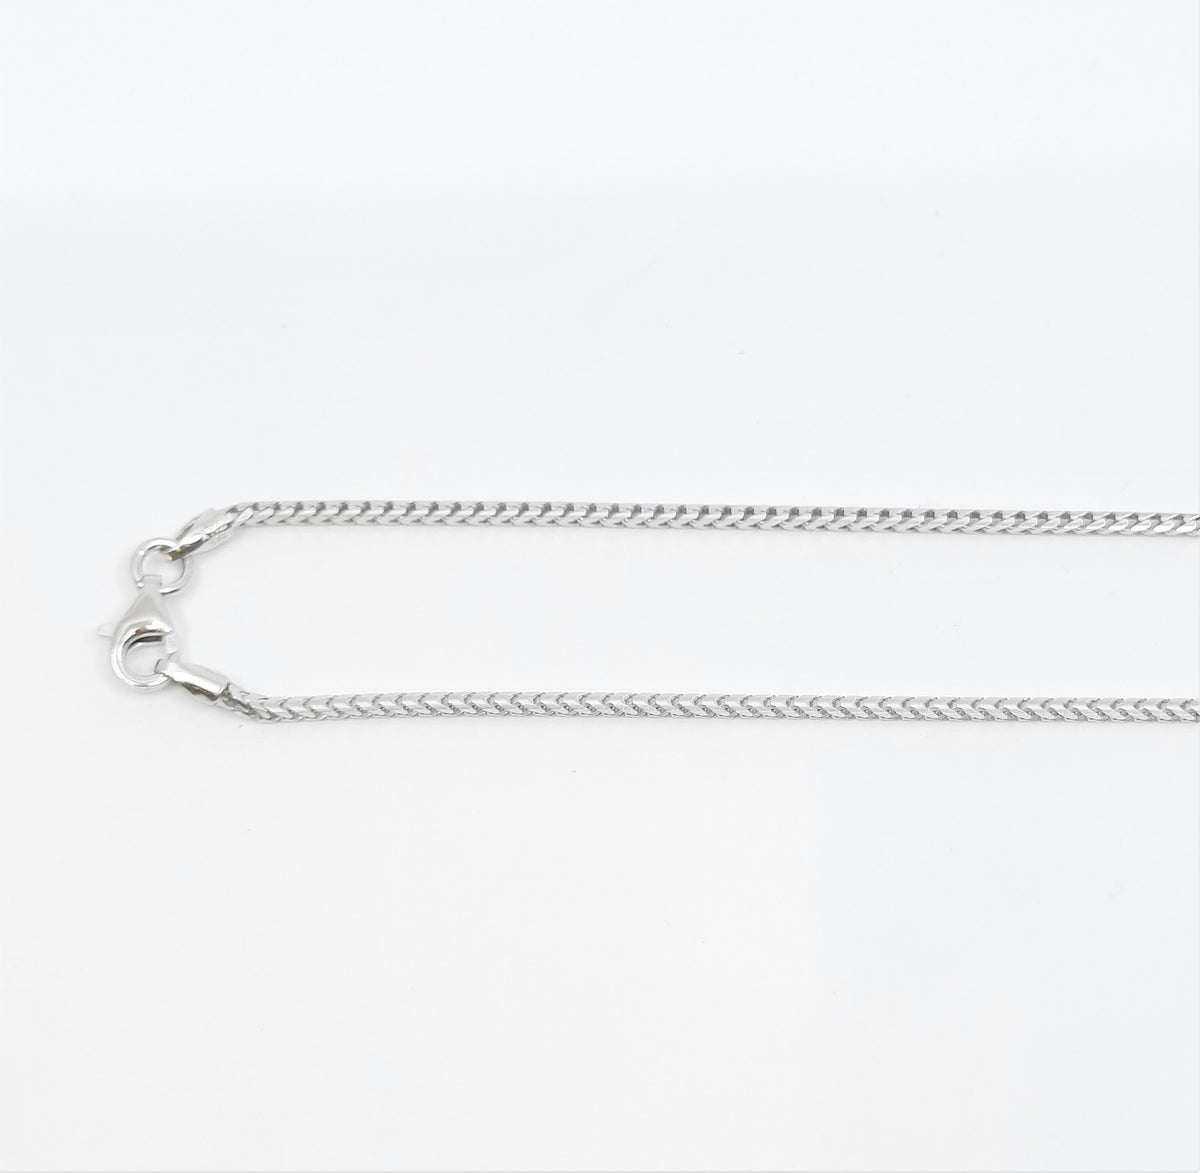 925 Sterling Silver 1.4mm Rhodium Plated Franco Chain with Lobster Clasp - 18 Inches